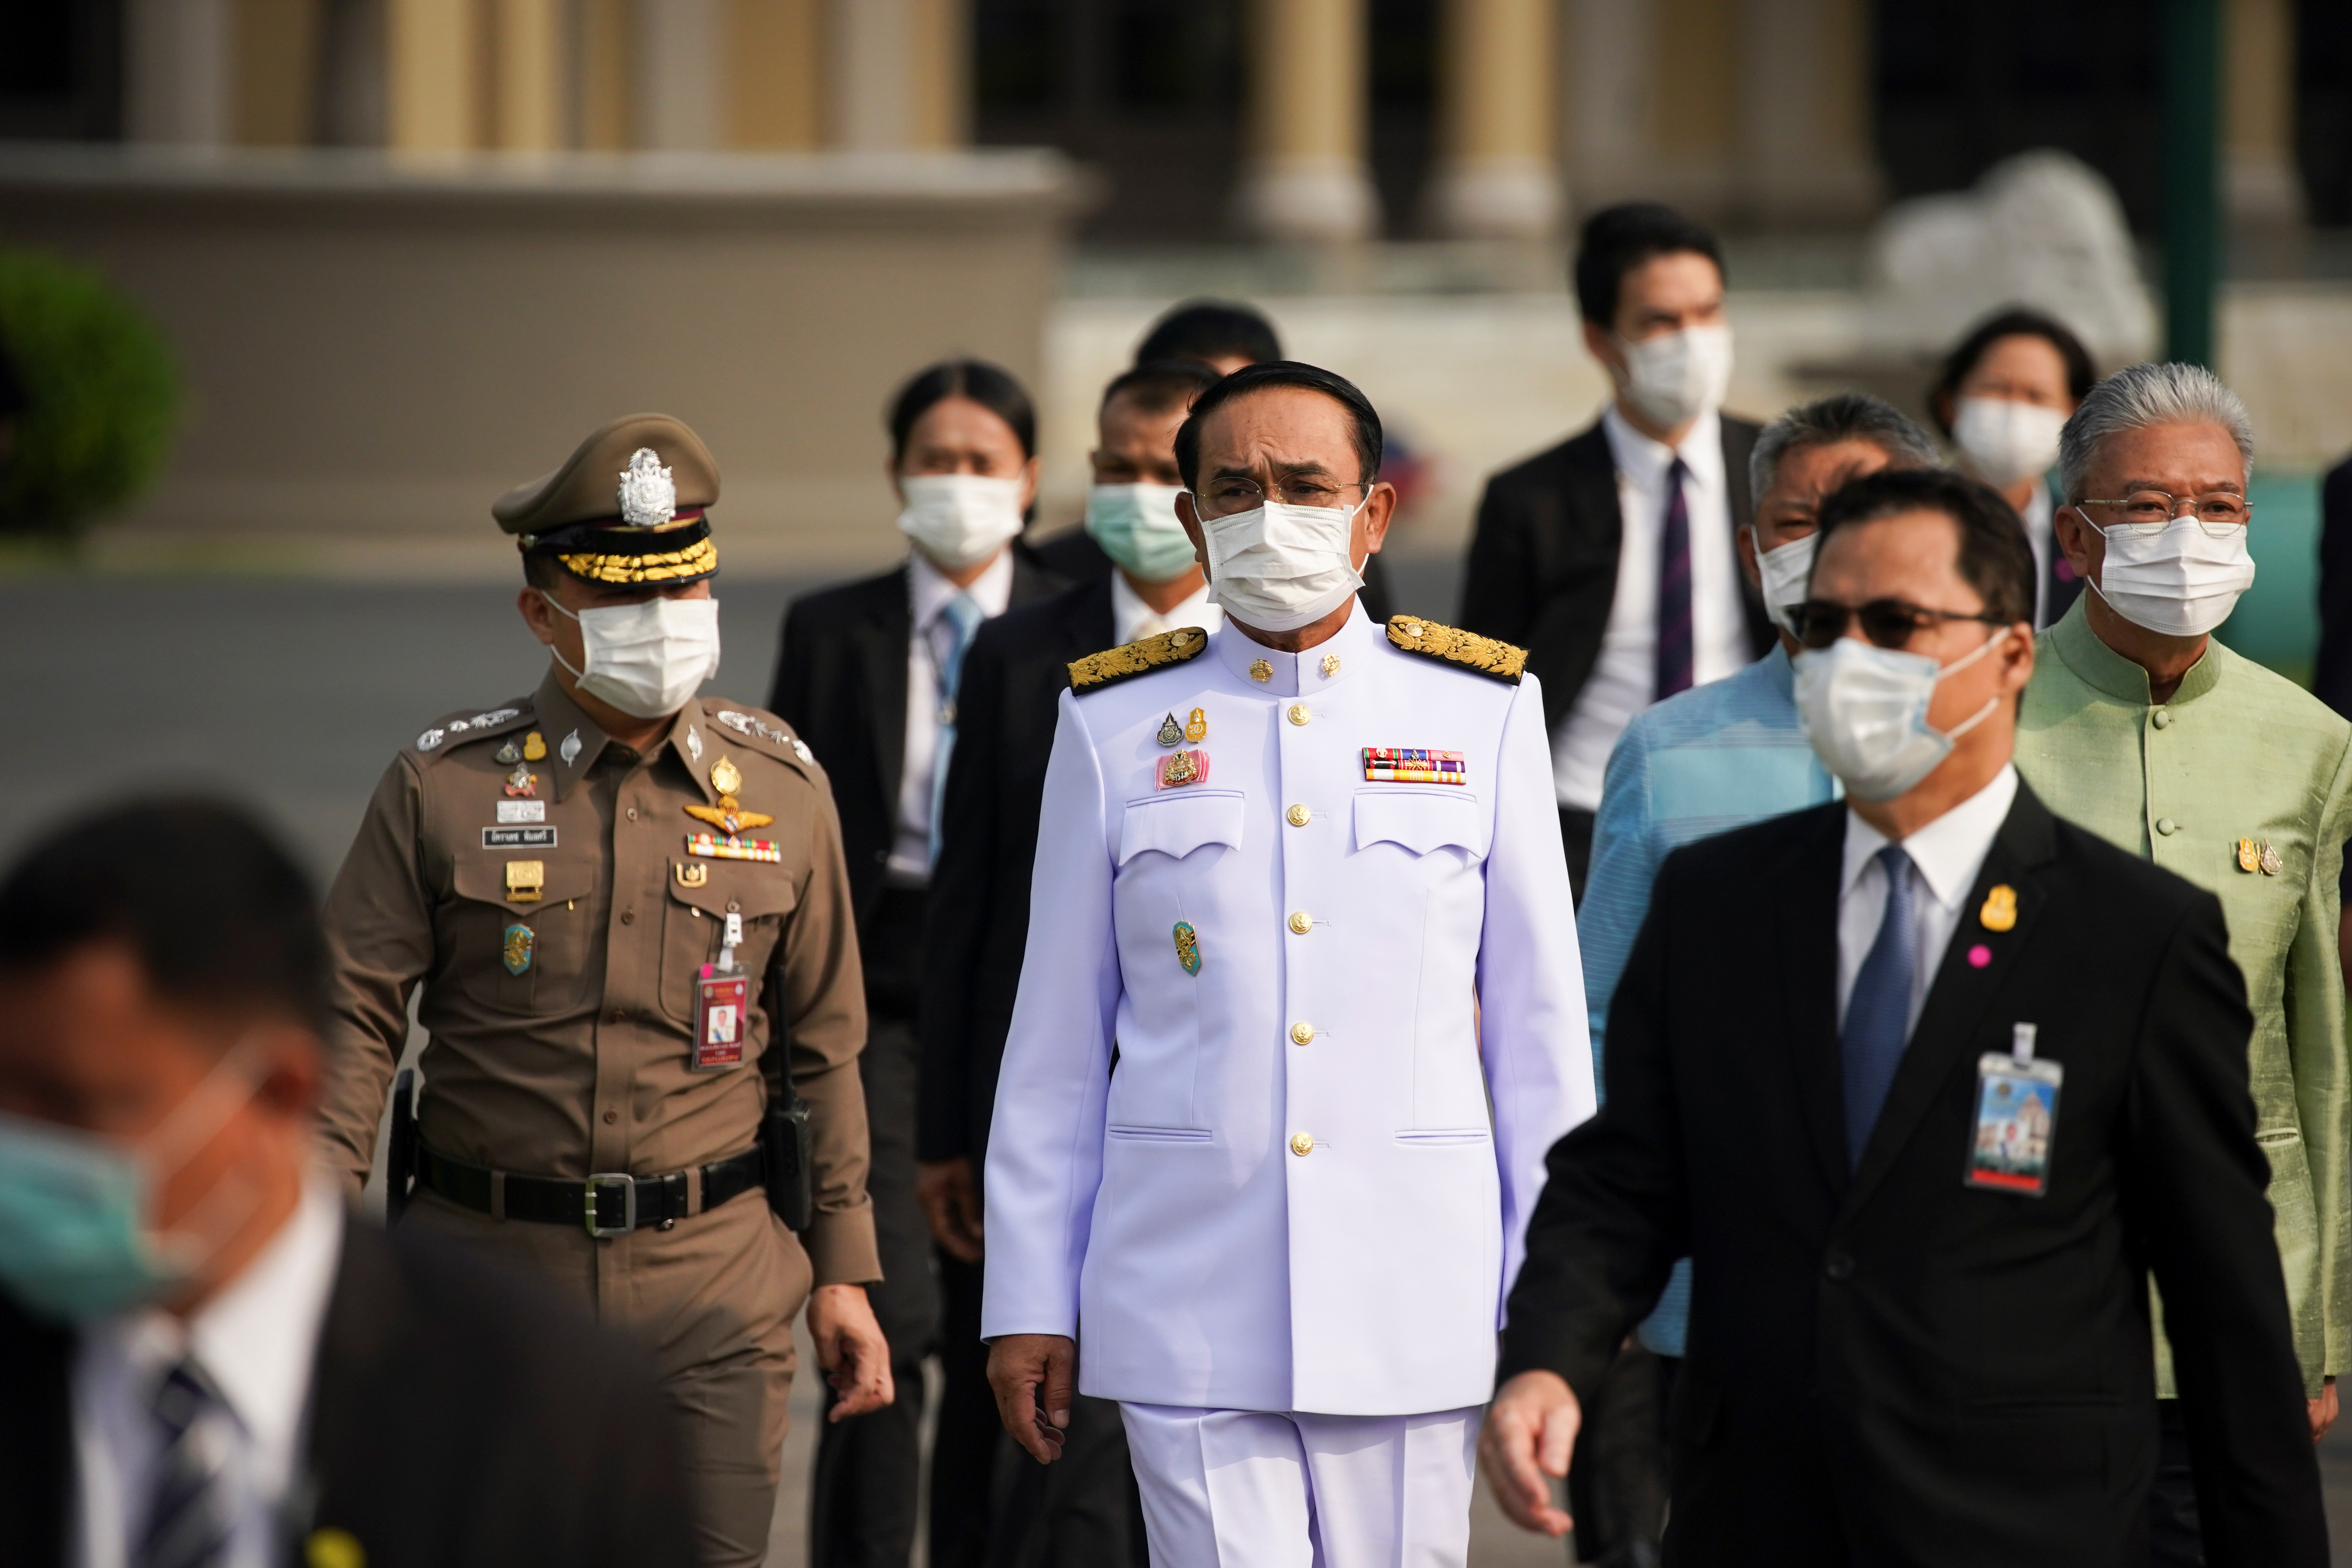 Thailand's Prime Minister Prayuth Chan-ocha arrives before a family photo session with new cabinet ministers at the Government House in Bangkok